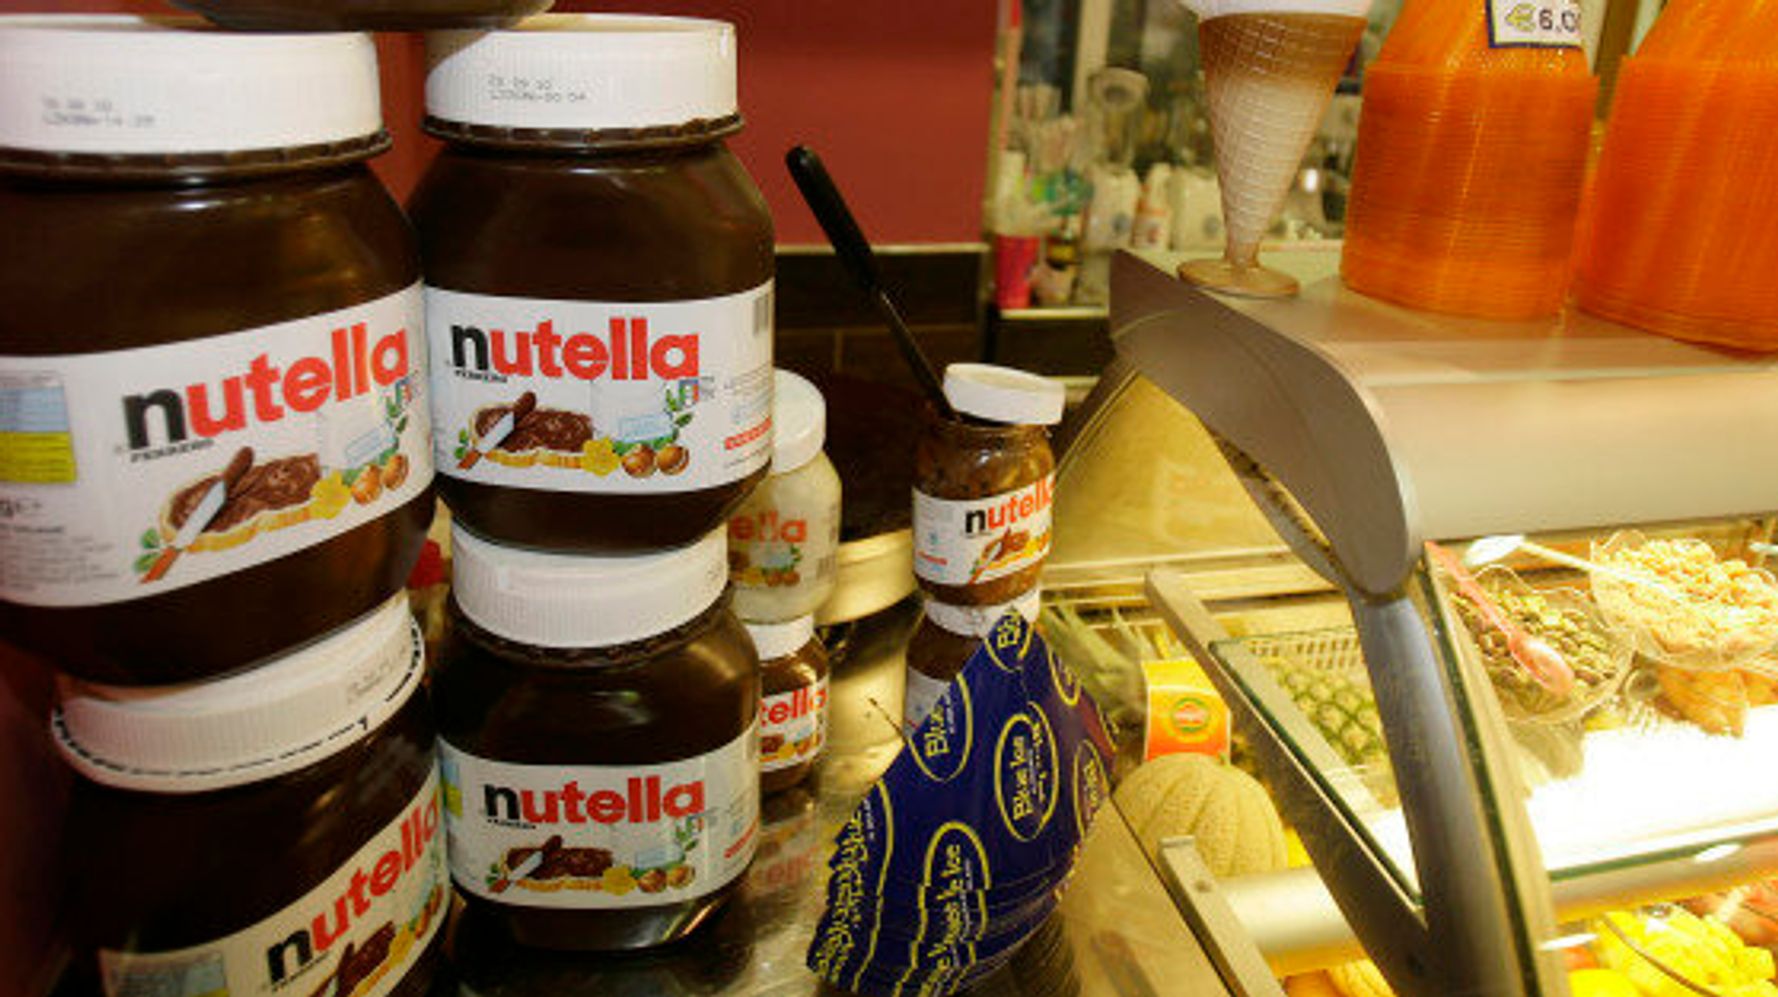 5KG NUTELLA IN AMSTERDAM, Travel and Share